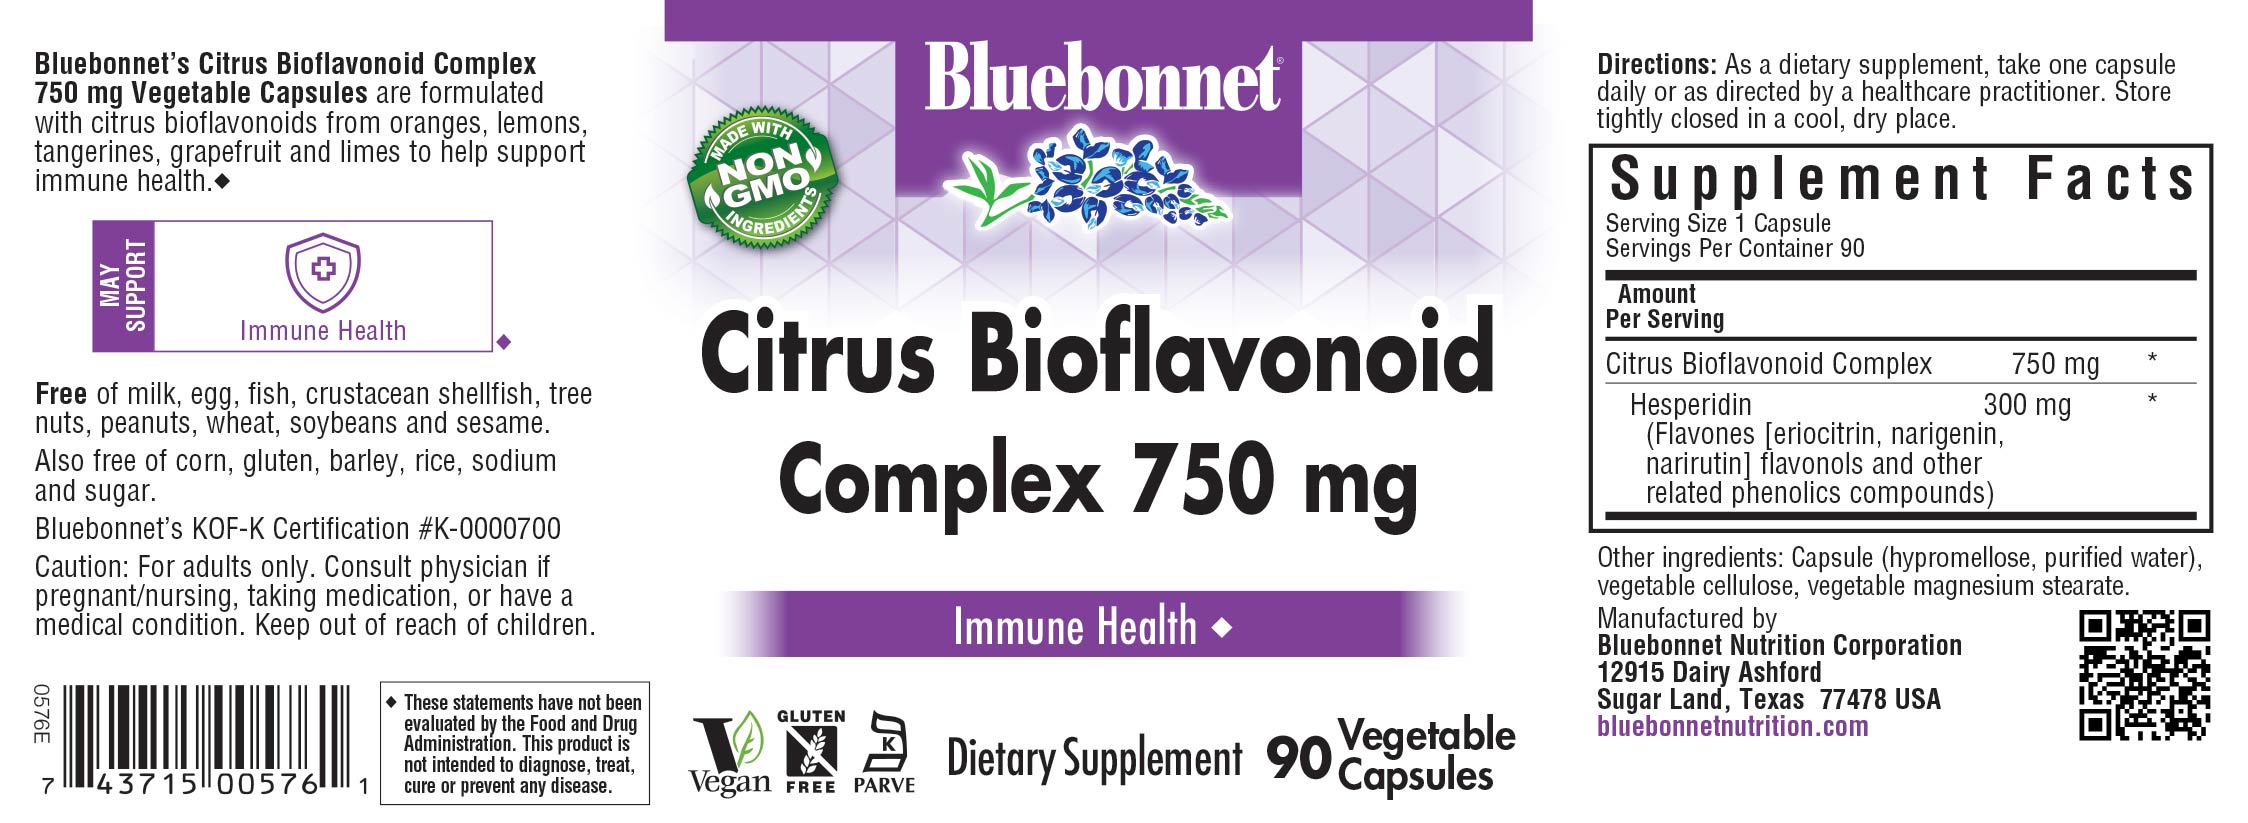 Bluebonnet’s Citrus Bioflavonoid Complex 750 mg Vegetable Capsules are formulated with citrus bioflavonoids from oranges, lemons, tangerines, grapefruit and limes to help support immune function.